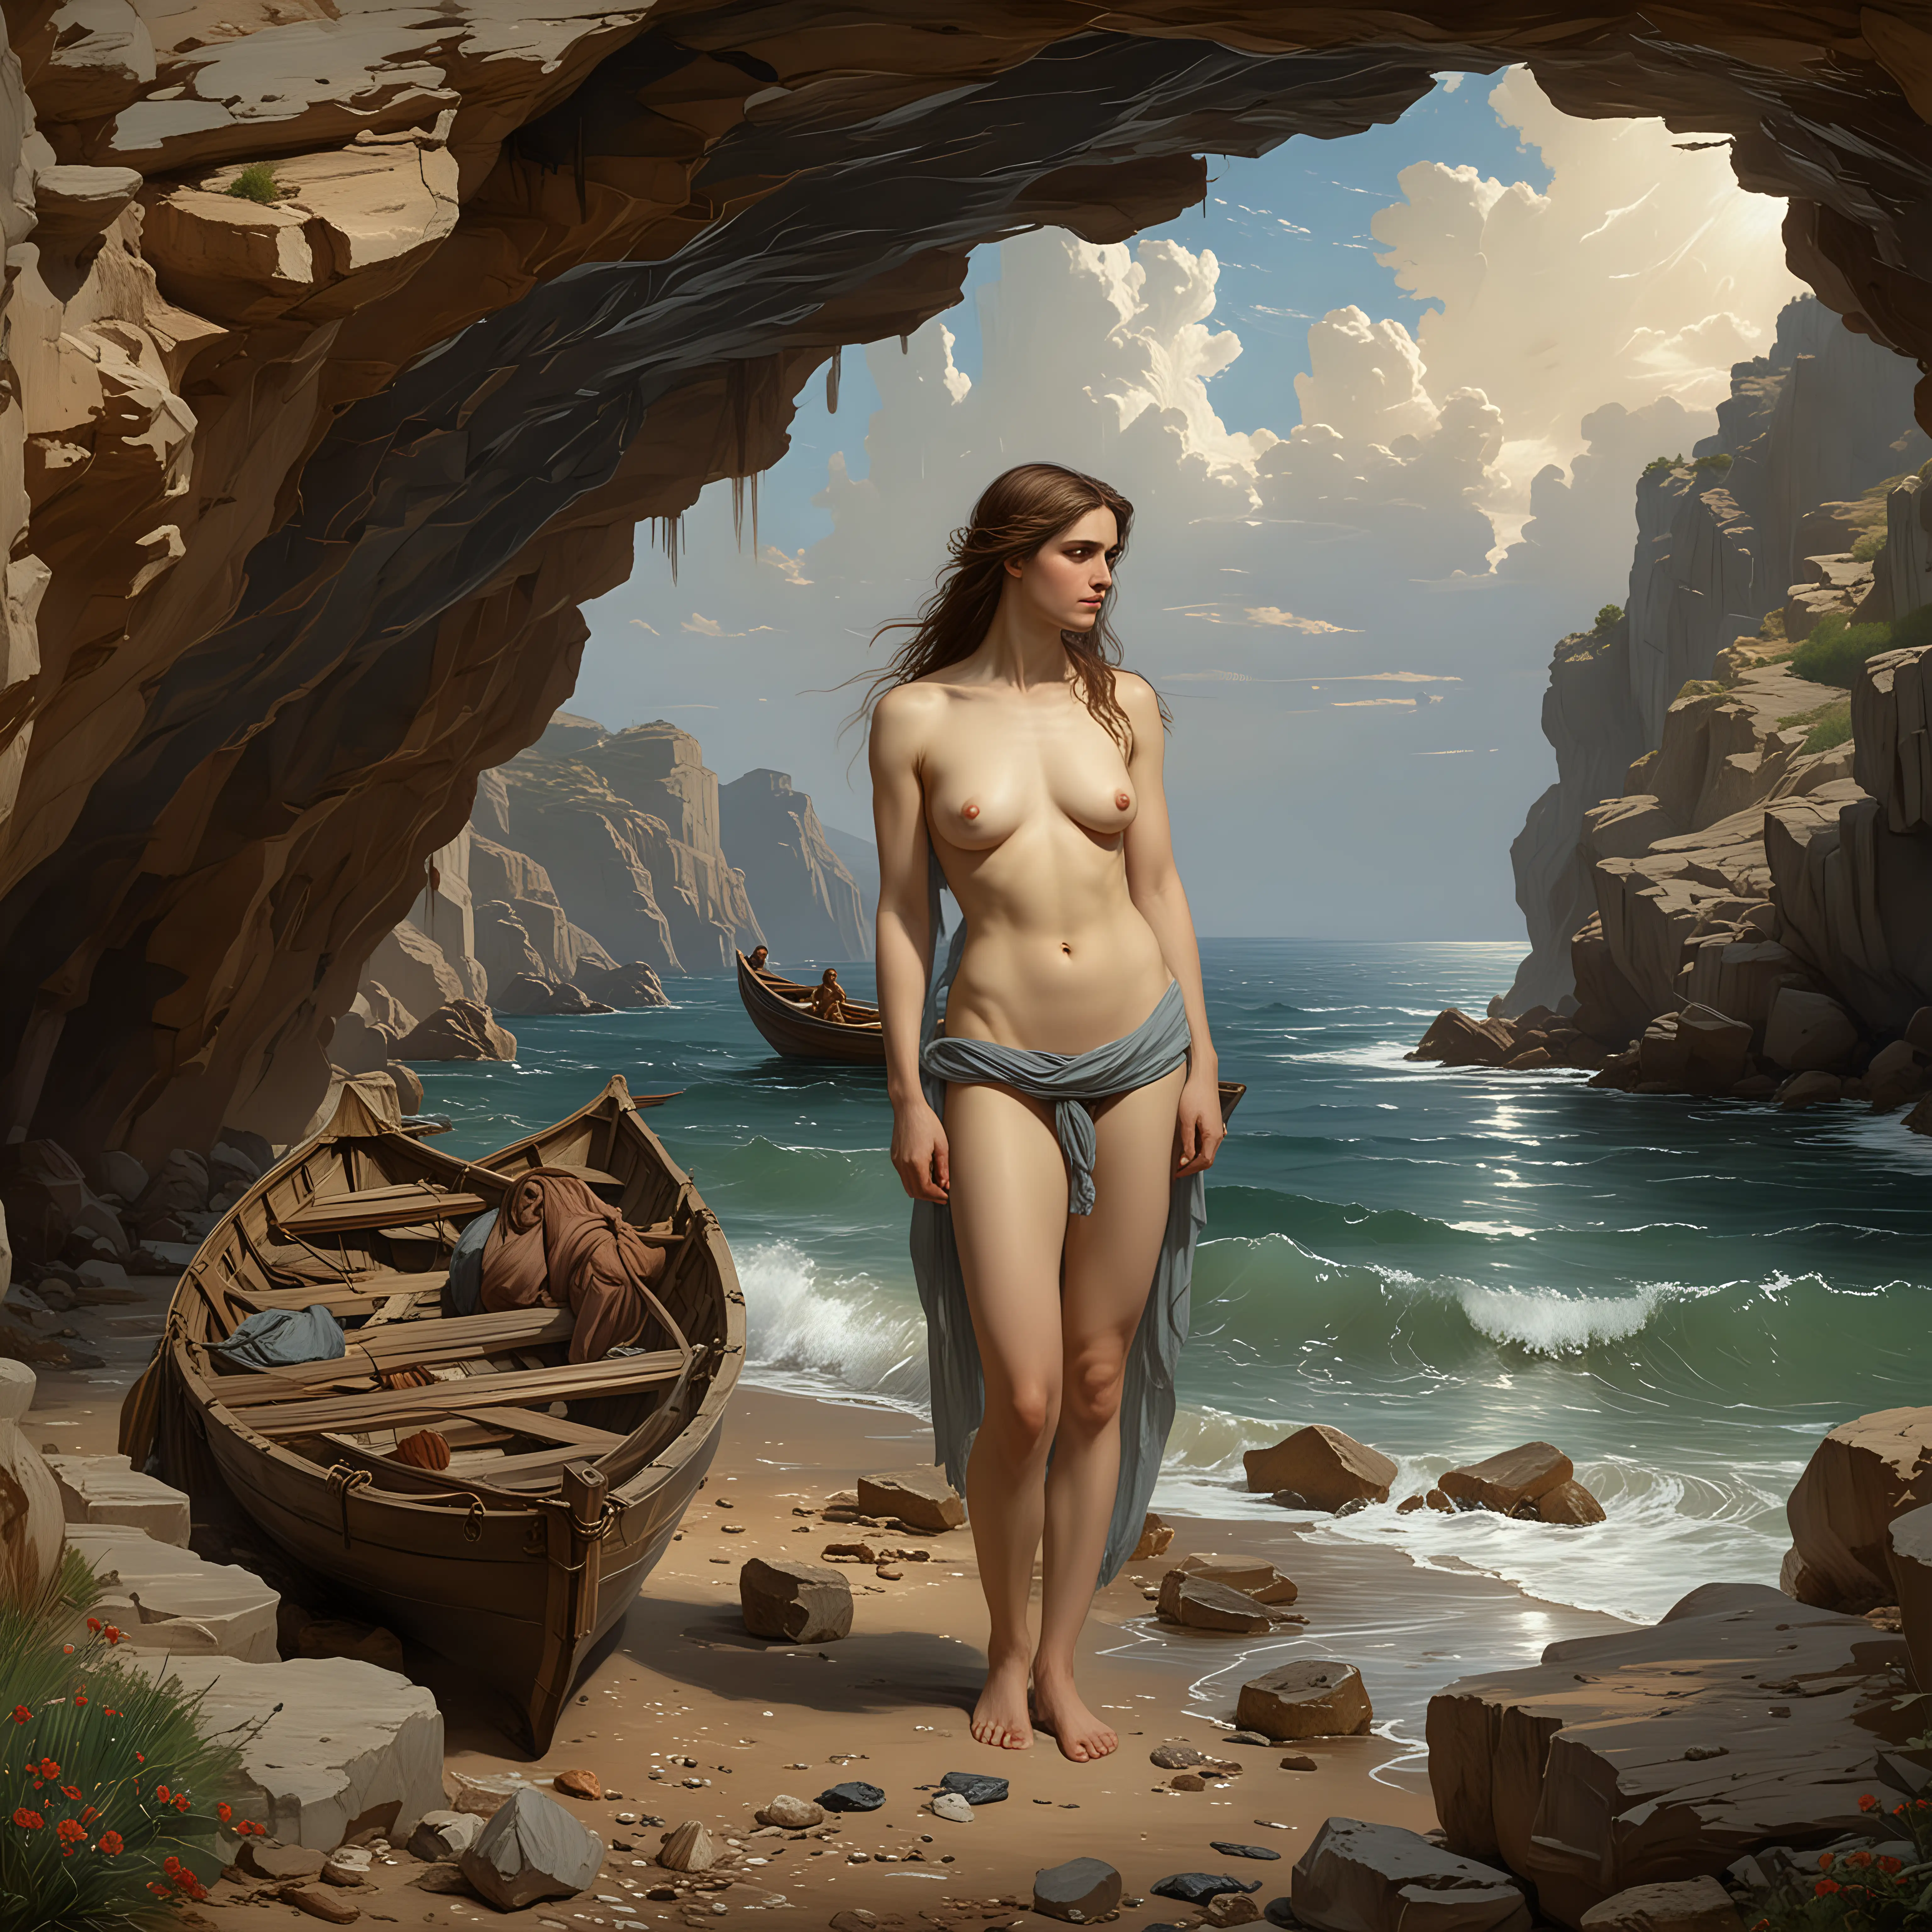 The muse, who is wearing a scarf covering her lower body, standing on the seashore, is looking sadly at Odysseus from inside the cave.  She is standing at the front of the image at the side. Odysseus is a handsome Greek man who sits naked in a boat, rowing the boat away from the shore. The image is envisioned in the artistic style of the renowned British painter, Sir John William Waterhouse